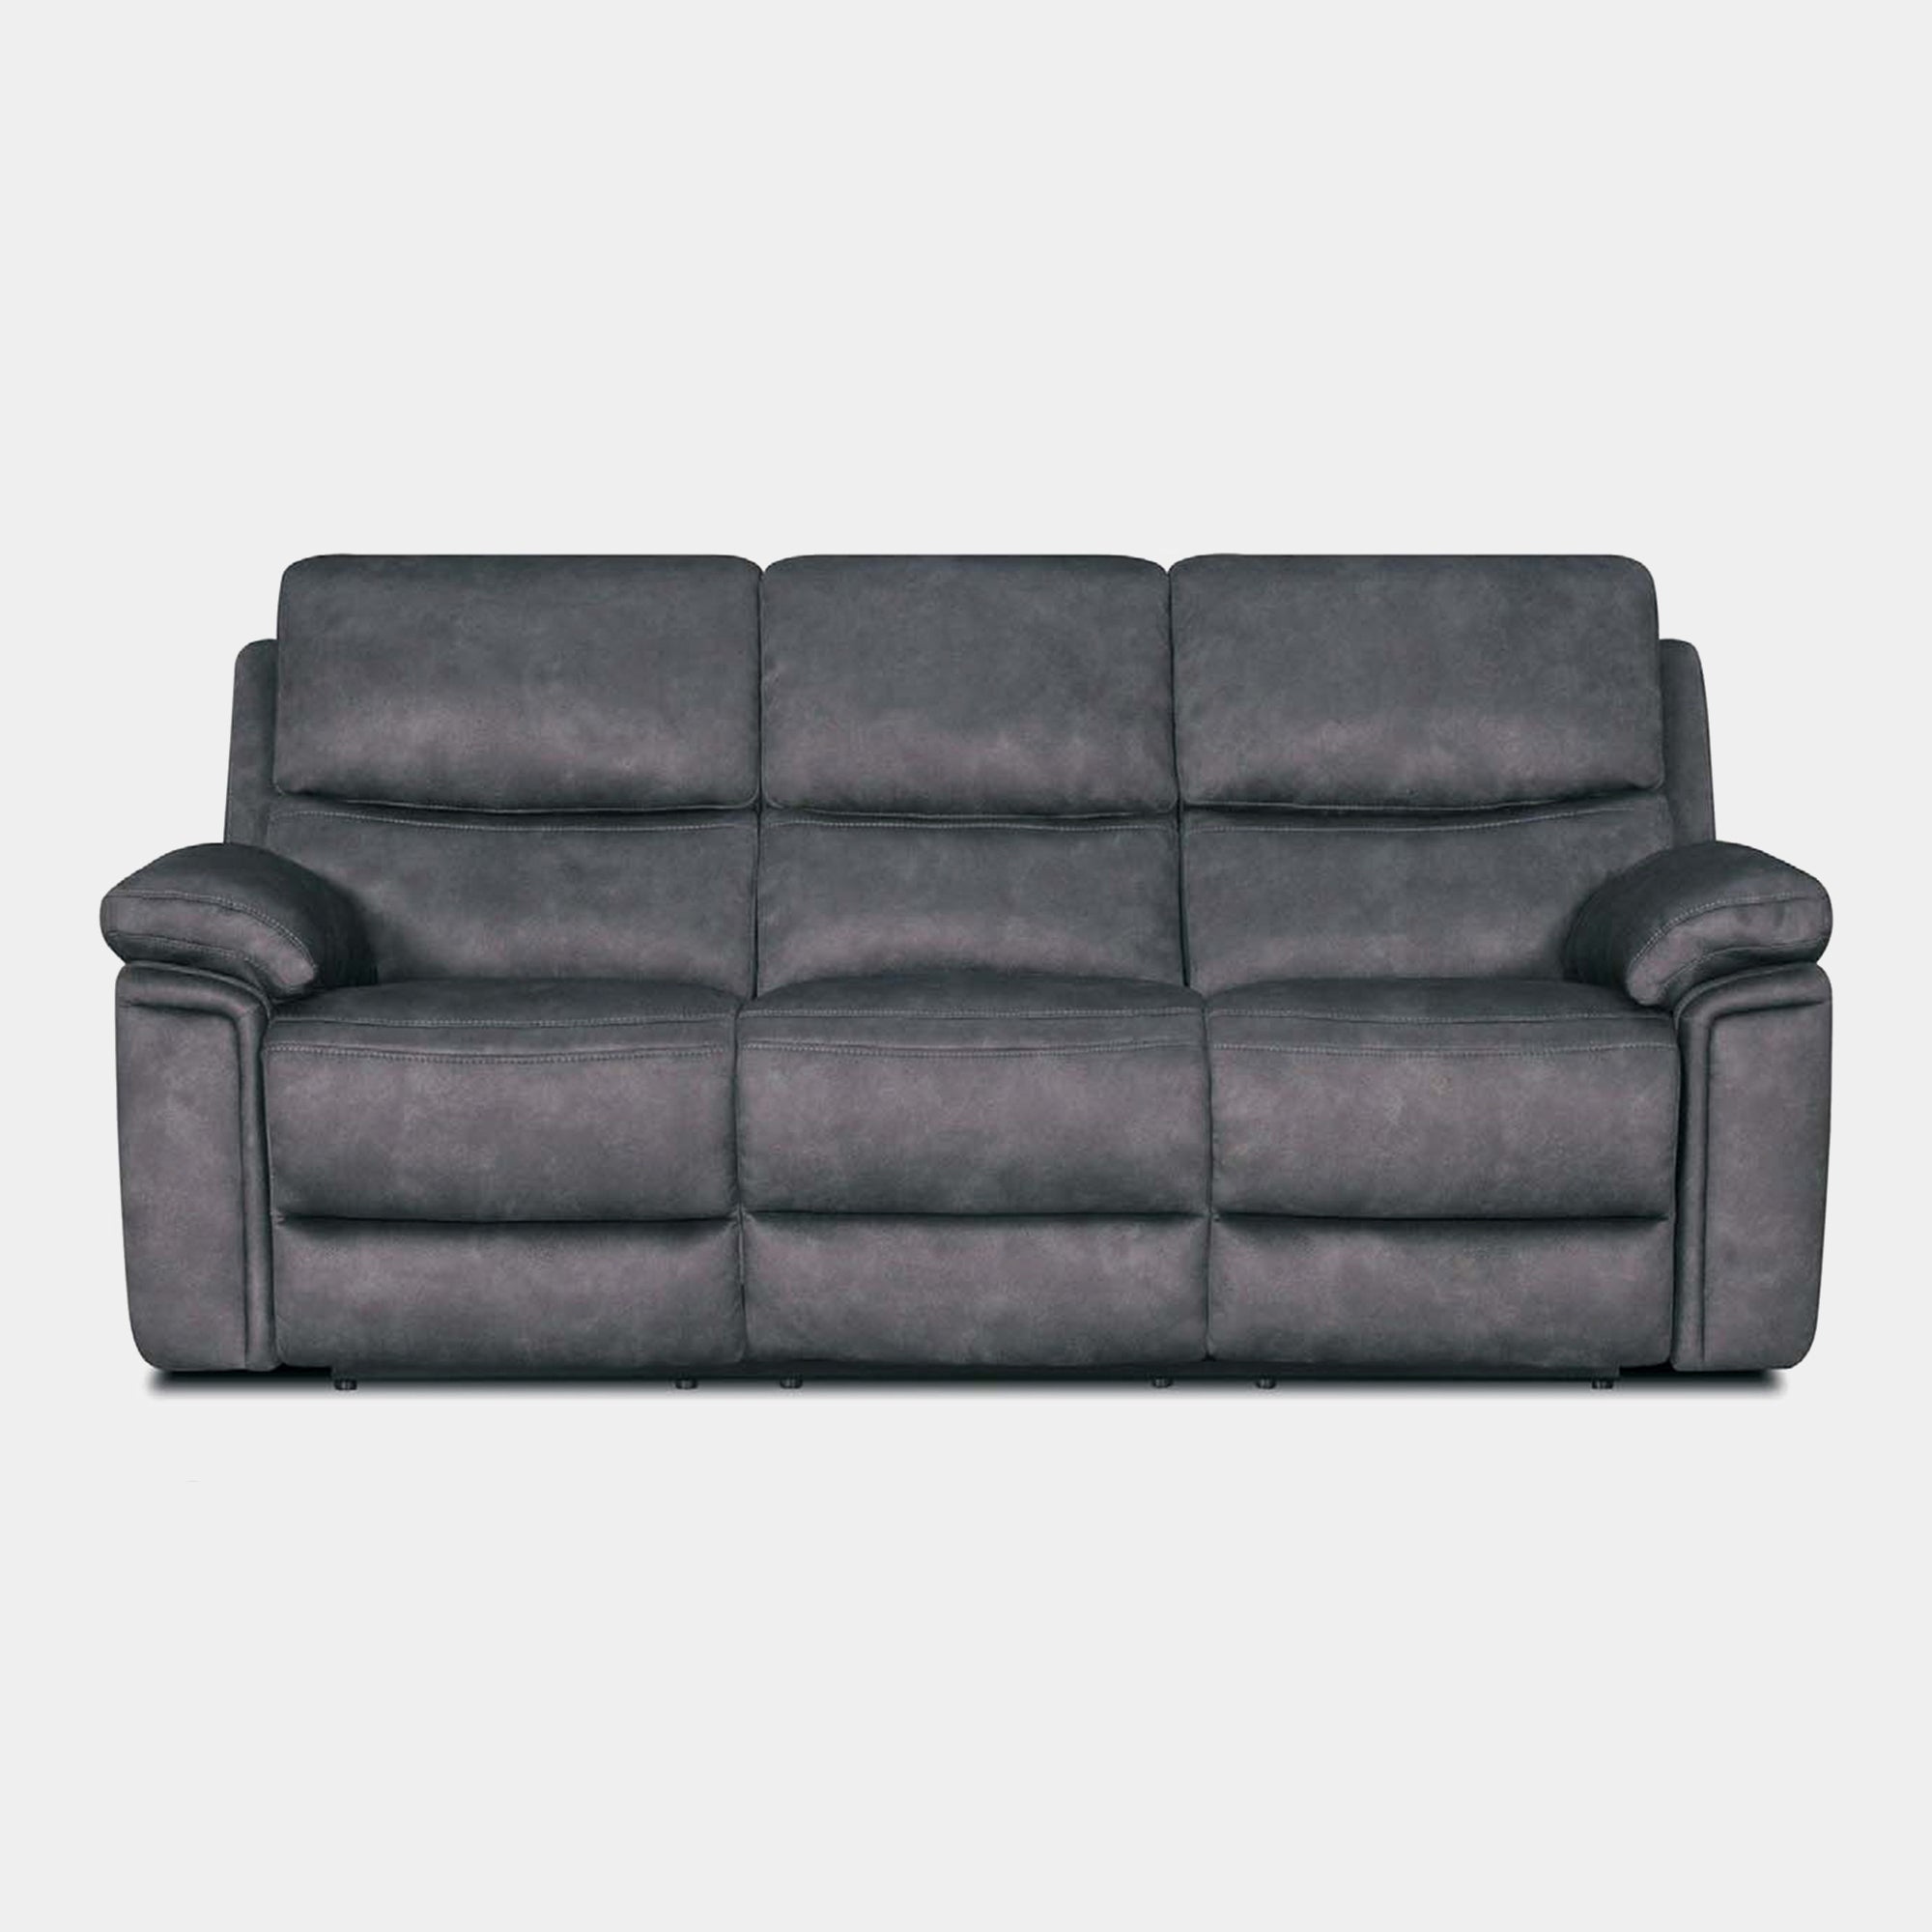 Tampa - 3 Seat 2 Manual Recliner Sofa In Fabric Or Leather Fabric Grade BSF20